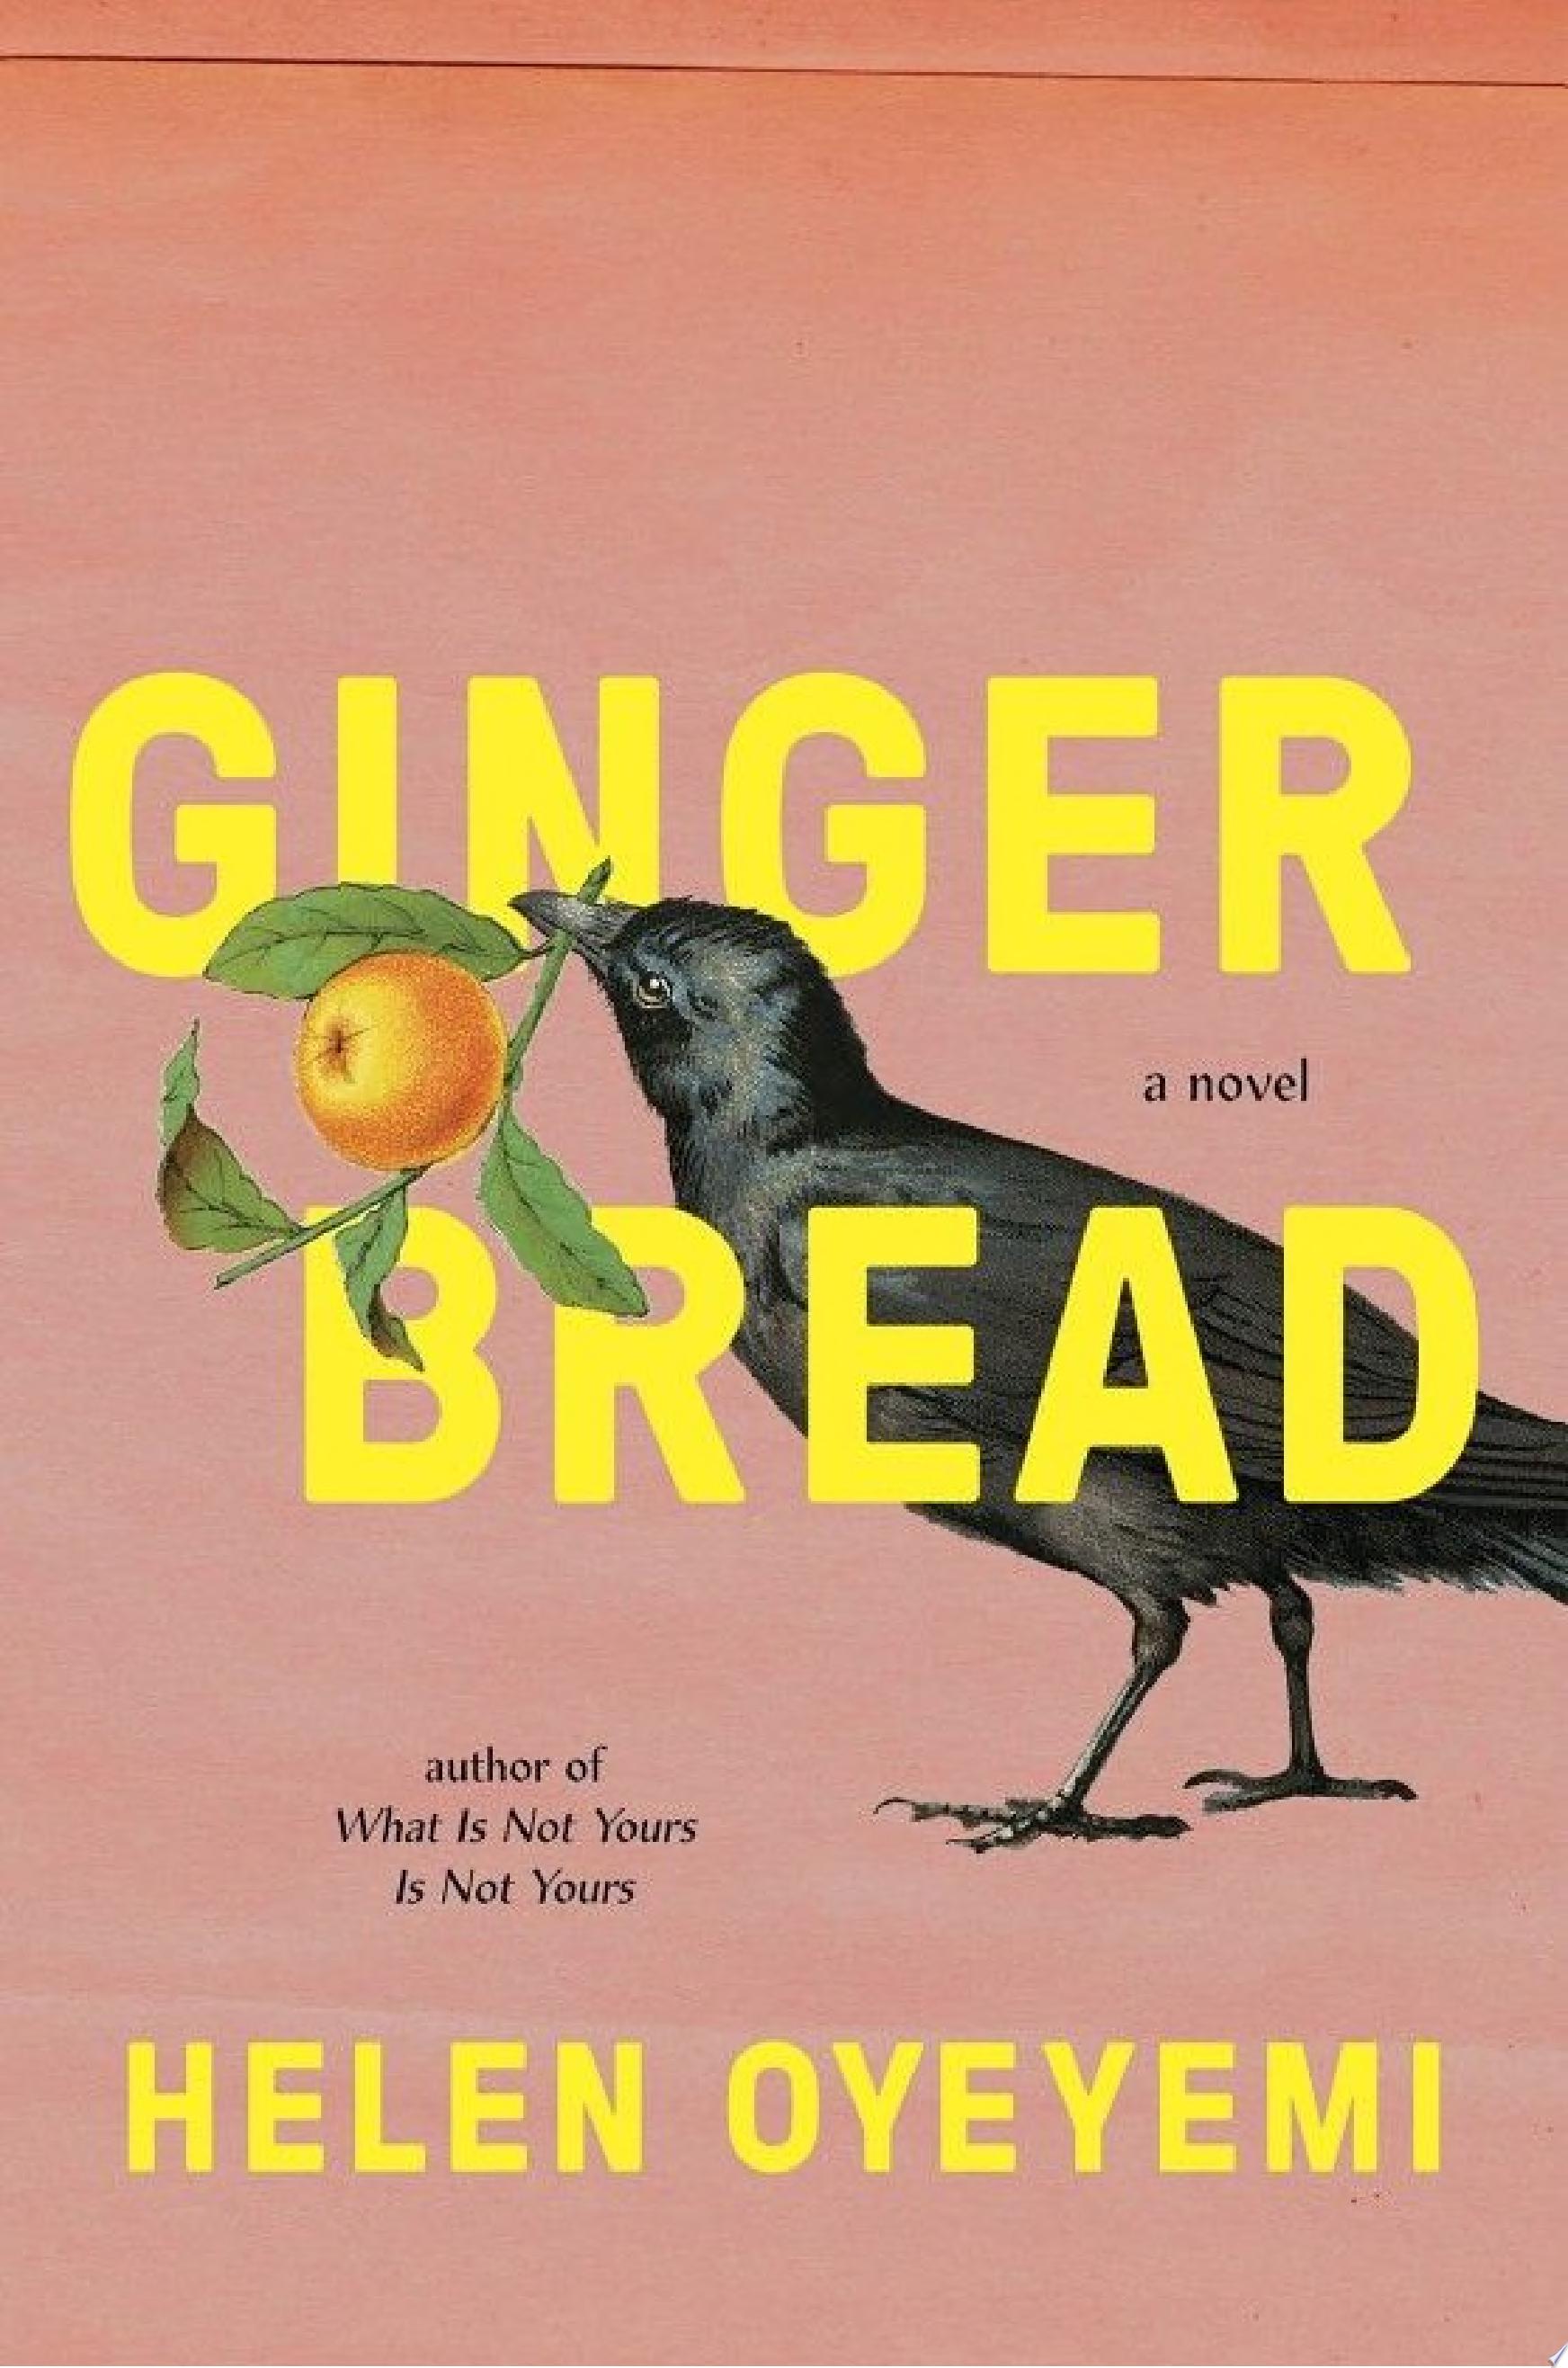 Image for "Gingerbread"